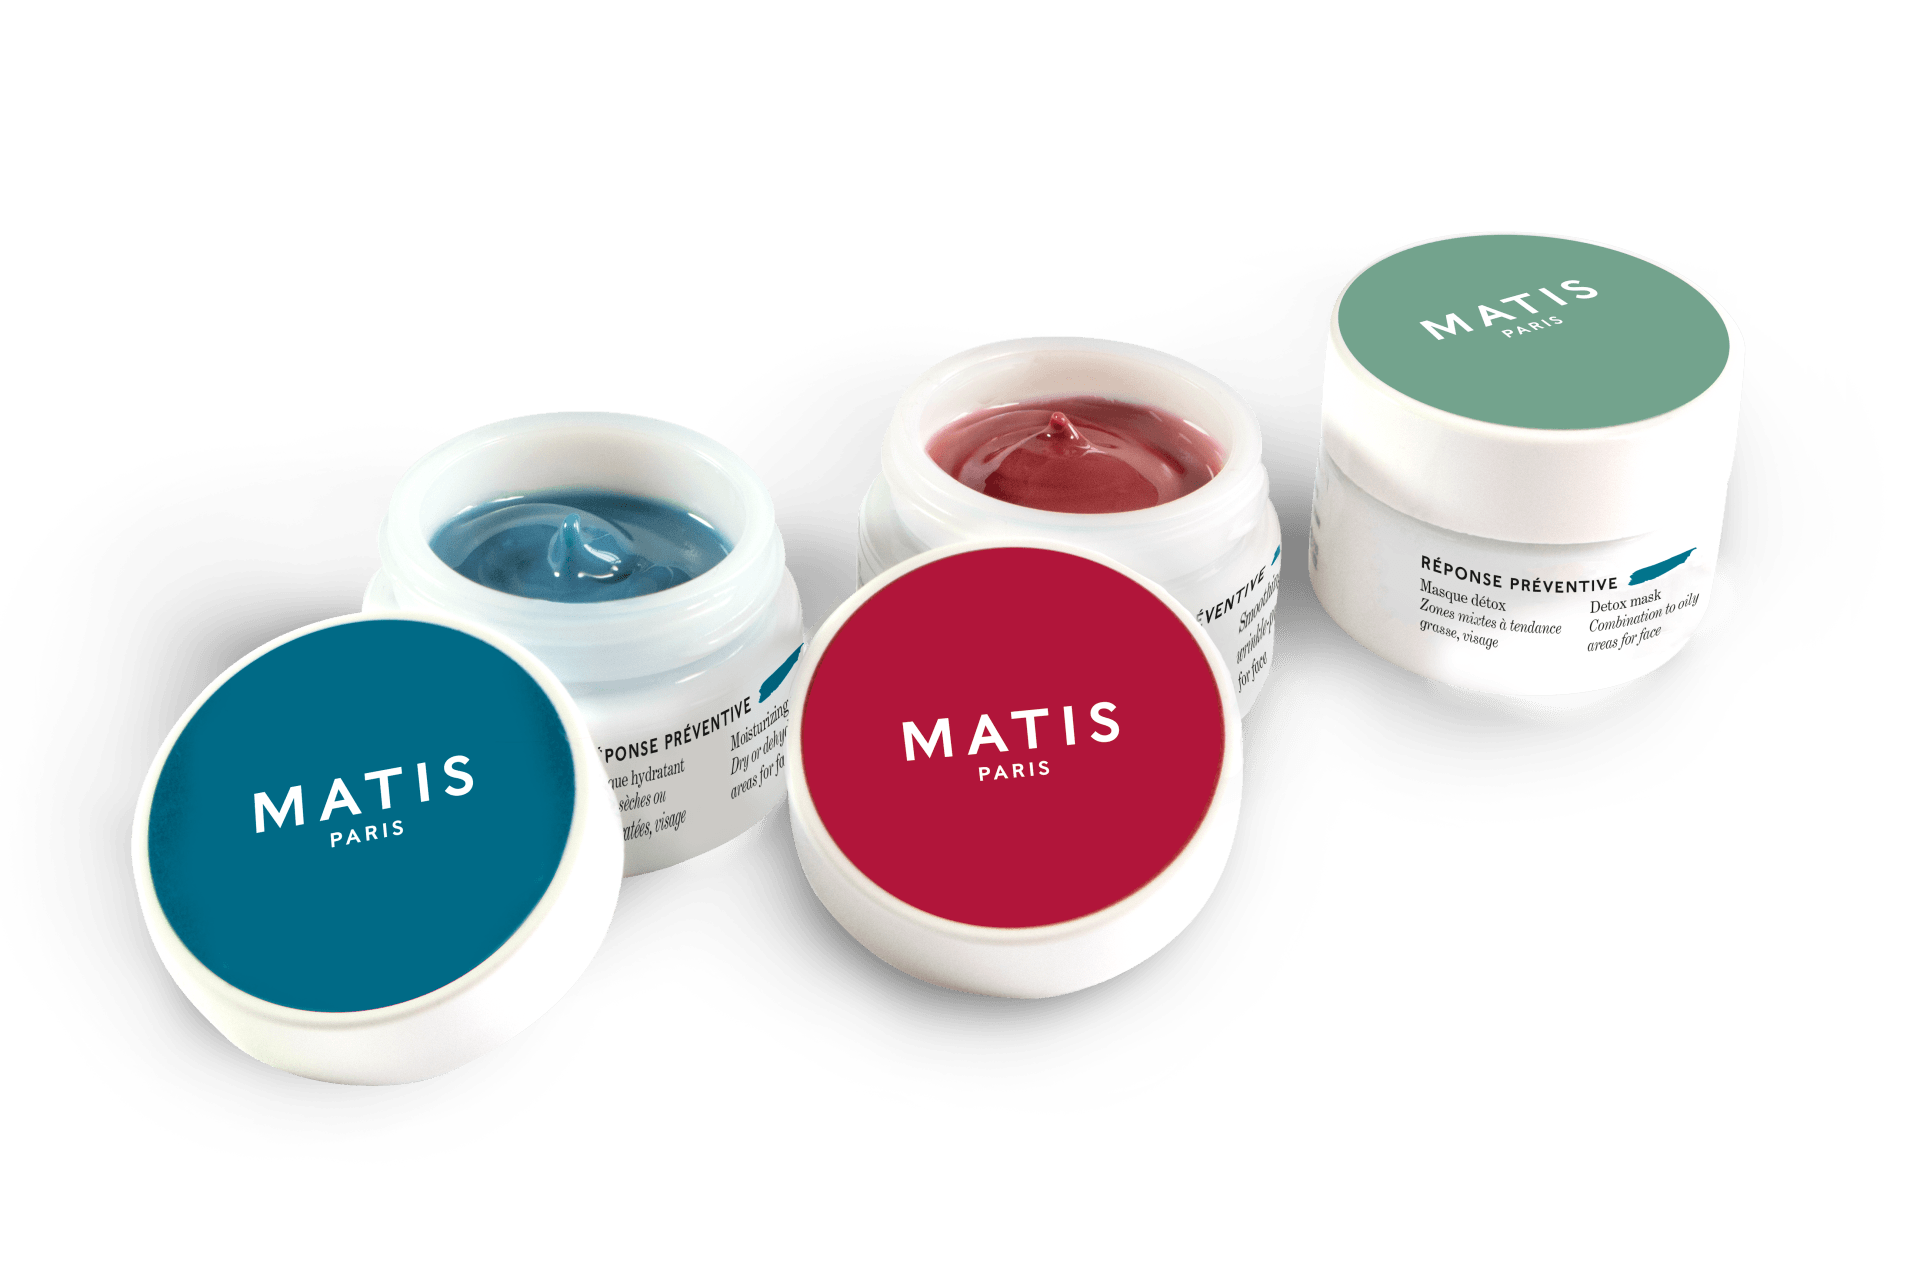 Matis Youth grain product